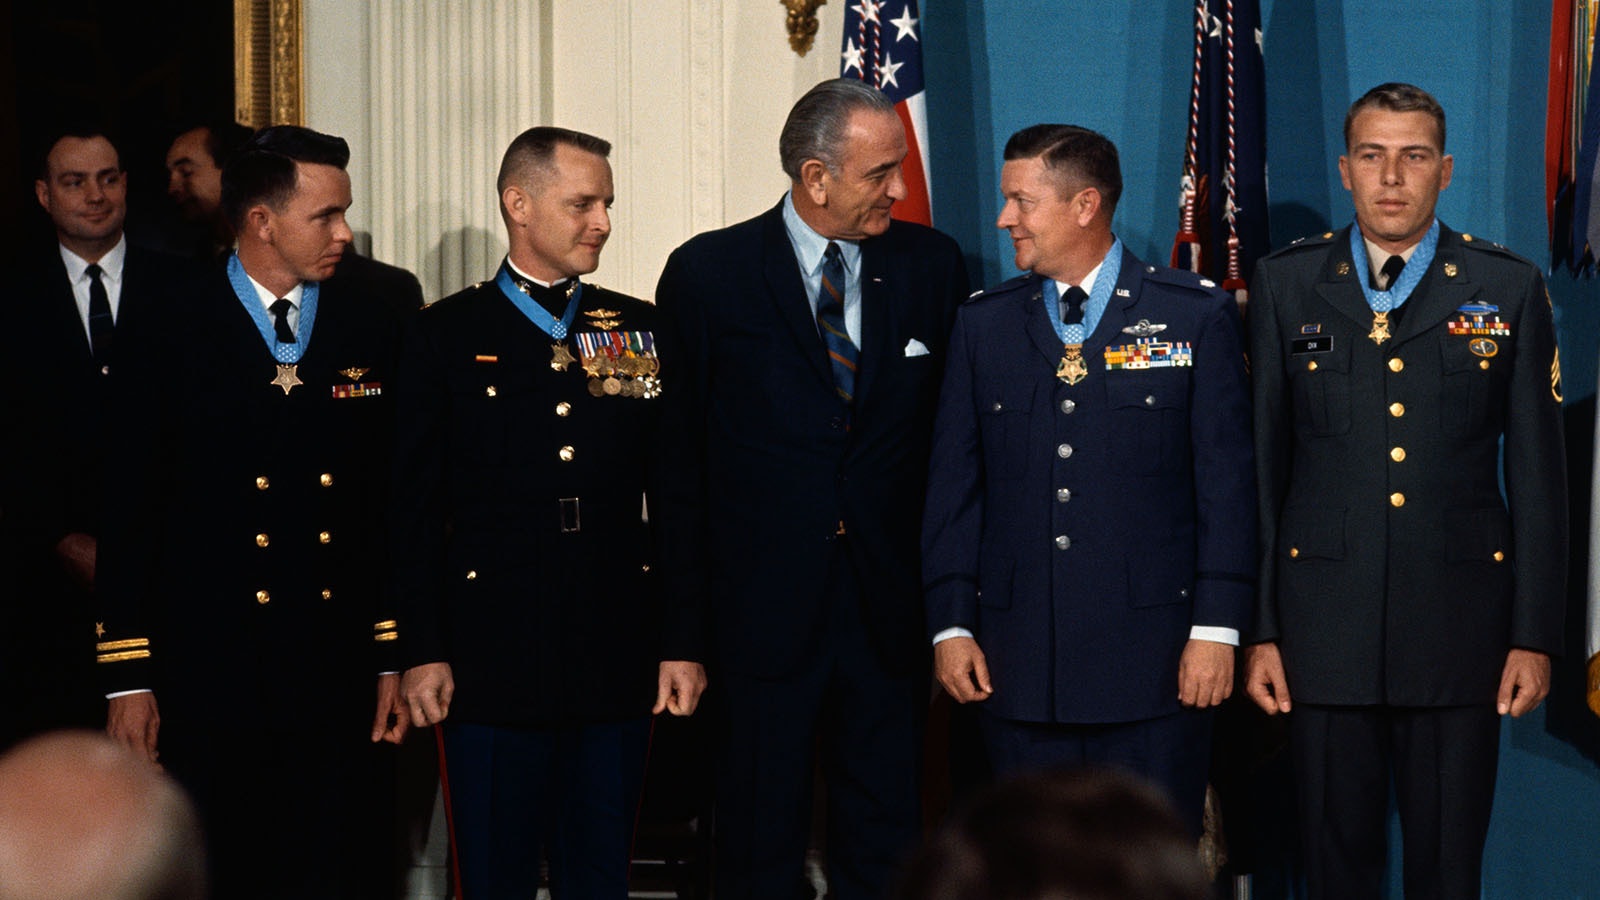 President Johnson poses with four U.S. servicemen, two of them from the same small town in Georgia, to whom he presented the Medal of Honor for heroism in Vietnam. From left, Navy Lt. Clyde E. Lassen, Ft. Myers, Fla.; Marine Maj. Stephen W. Pless, Newman, Ga.; President Johnson; Air Force Lt. Col. Joe M. Jackson, also from Newman, Ga.; and Army Staff Sgt. Drew D. Dix, Pueblo, Colorado.